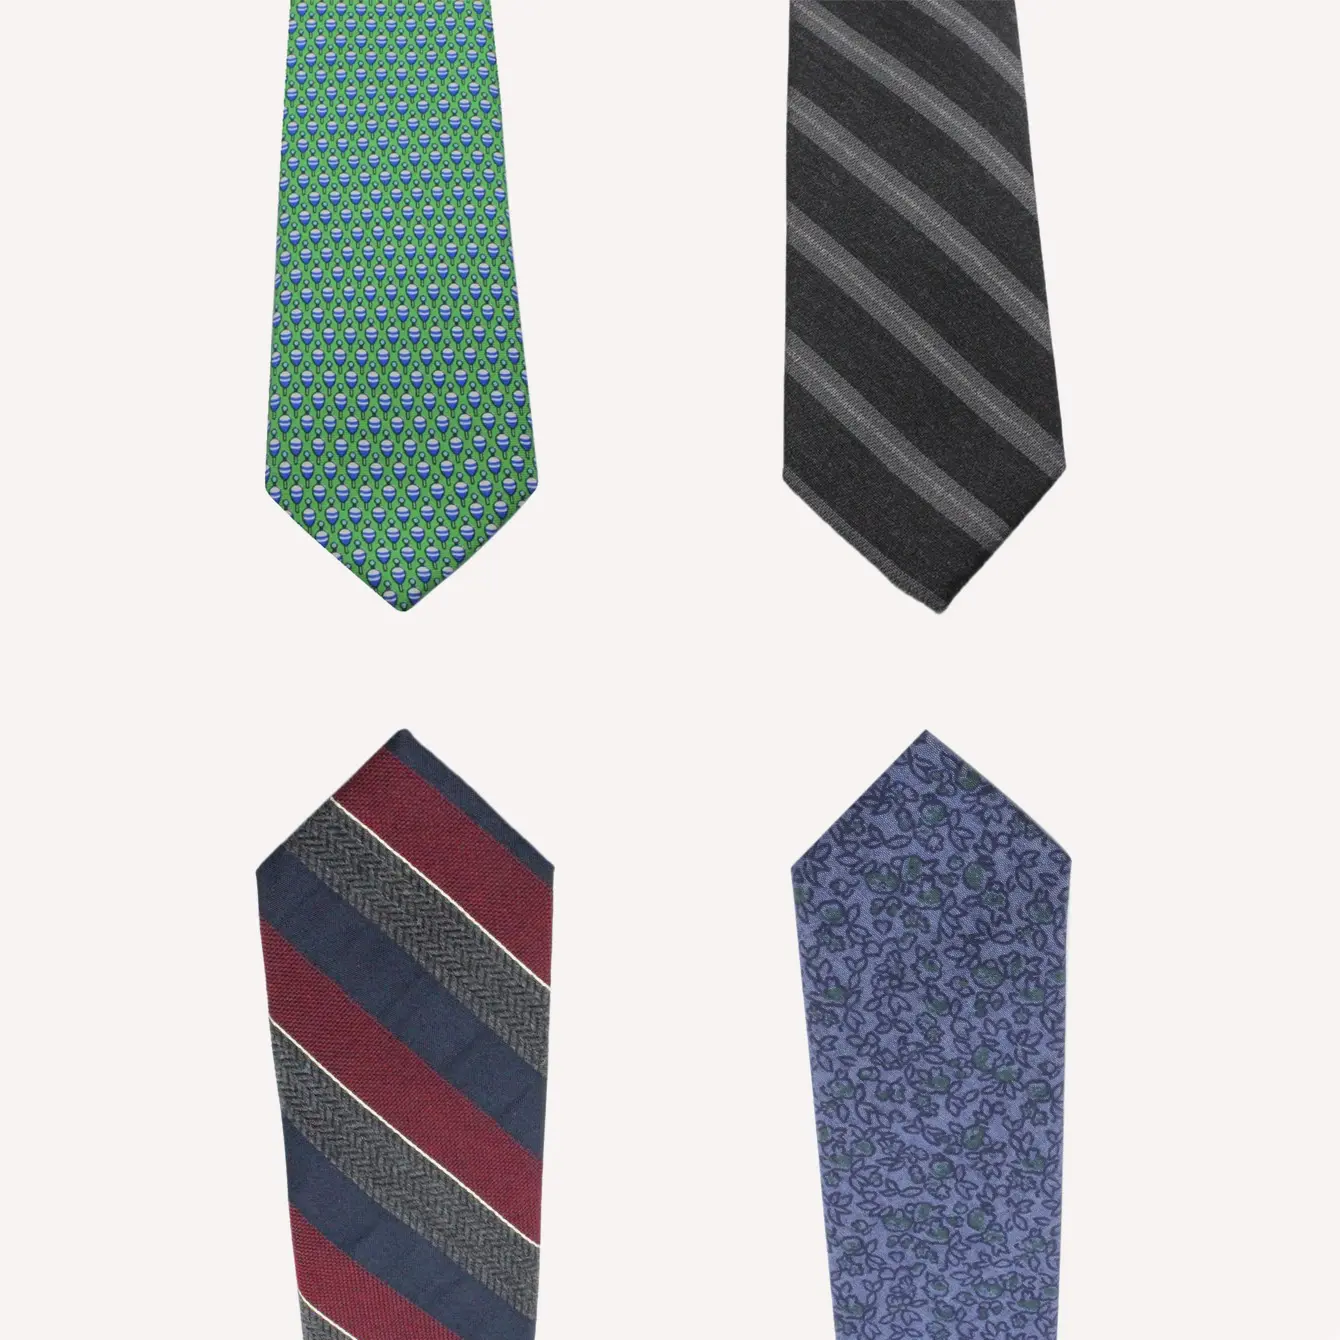 Fine and Dandy Ties